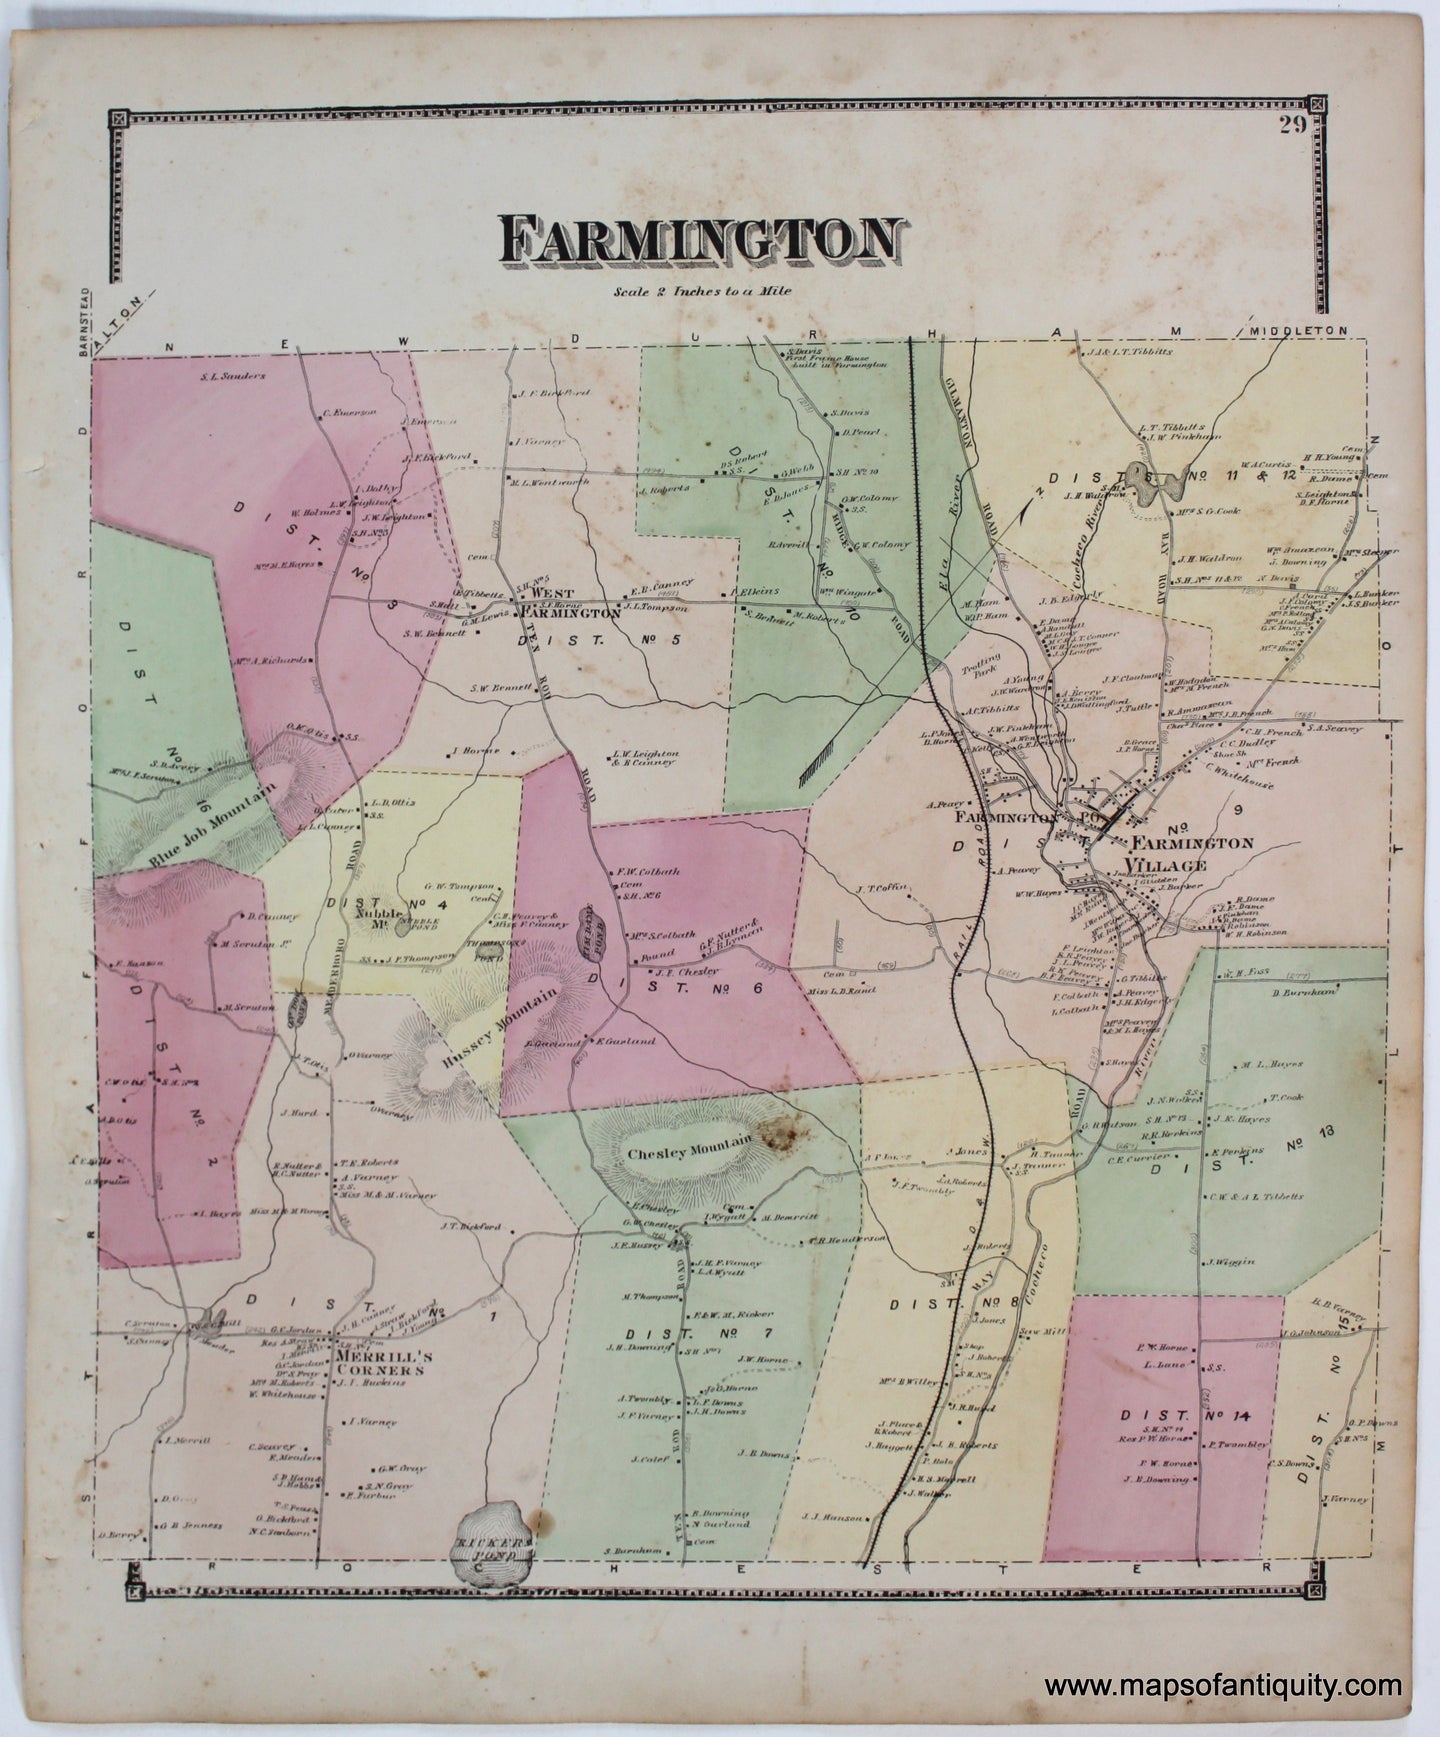 Antique-Map-Farmington-Strafford-County-Town-Towns-New-Hampshire-NH-Sanford-Everts-1871-1870s-1800s-Mid-Late-19th-Century-Maps-of-Antiquity